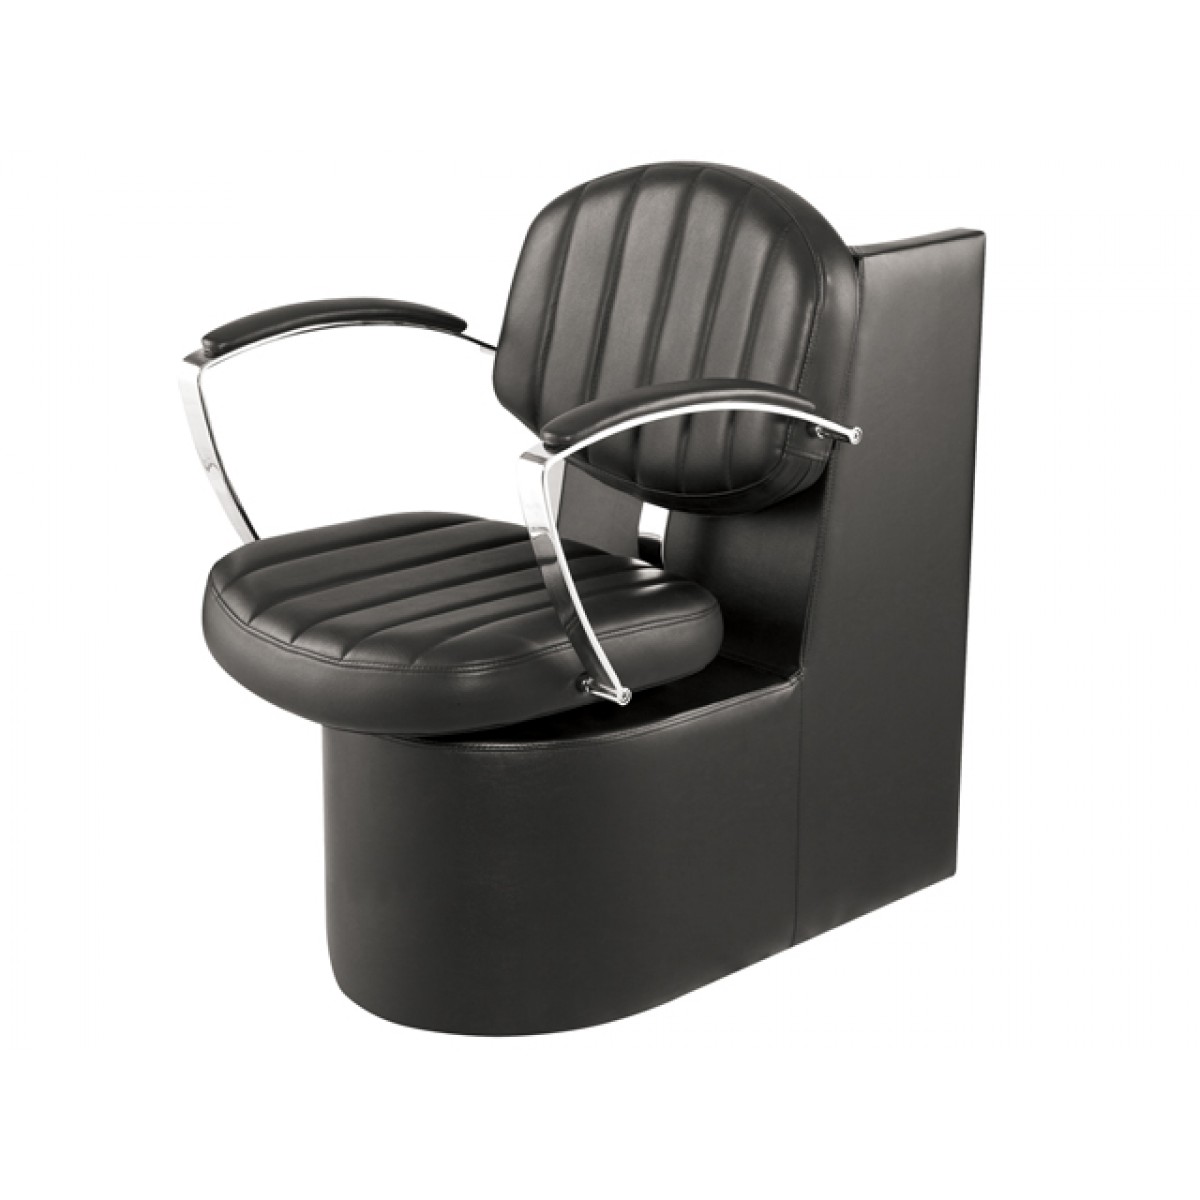 "ARENA" Dryer Chair